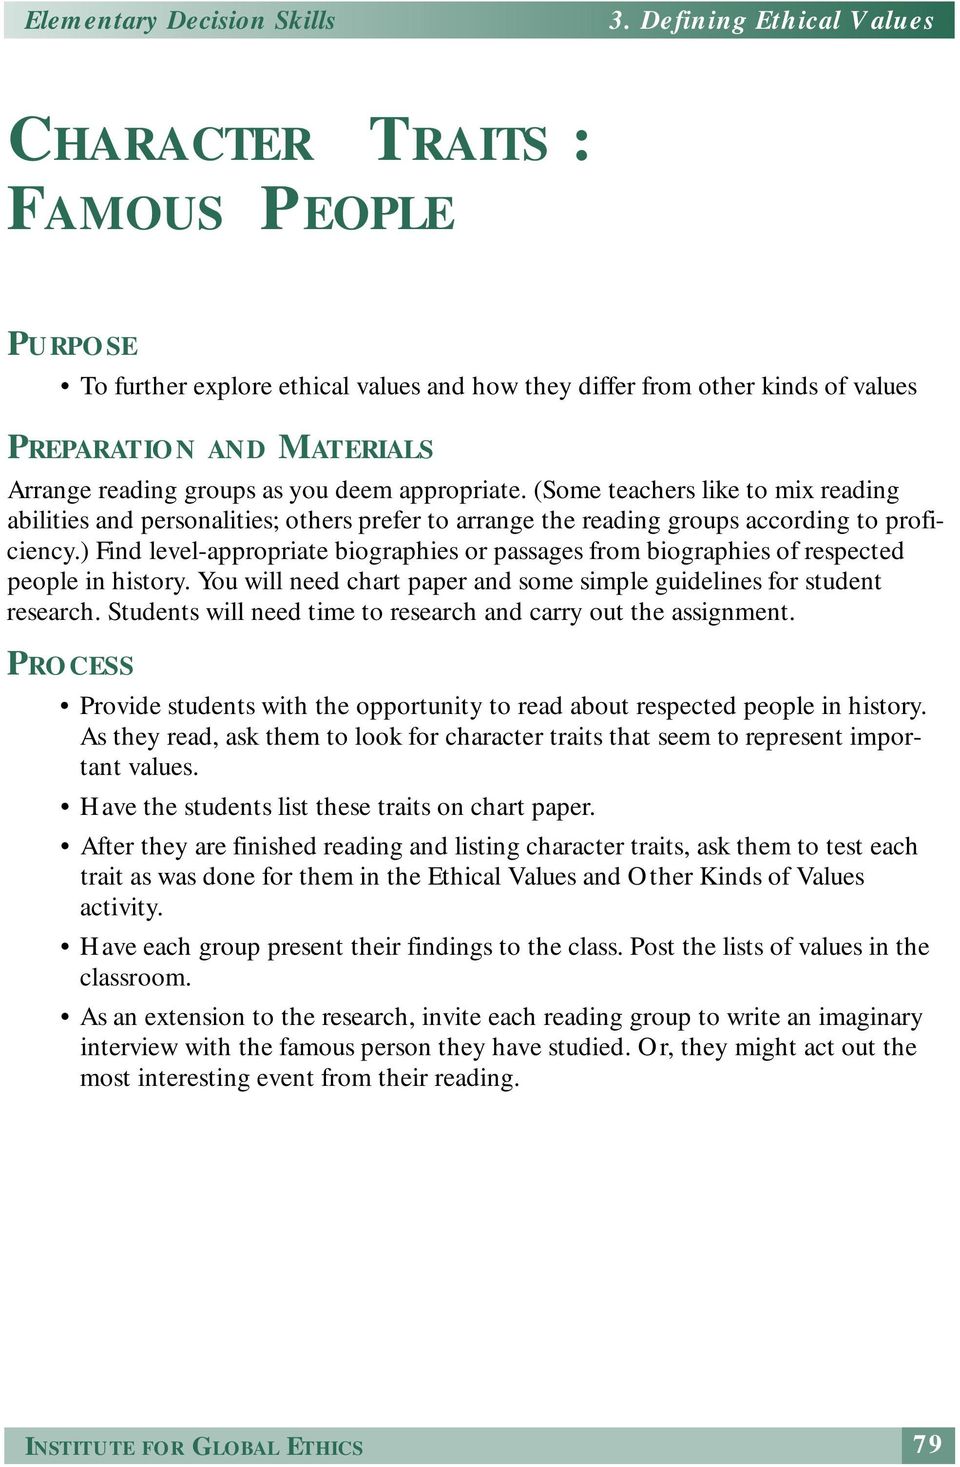 ) Find level-appropriate biographies or passages from biographies of respected people in history. You will need chart paper and some simple guidelines for student research.